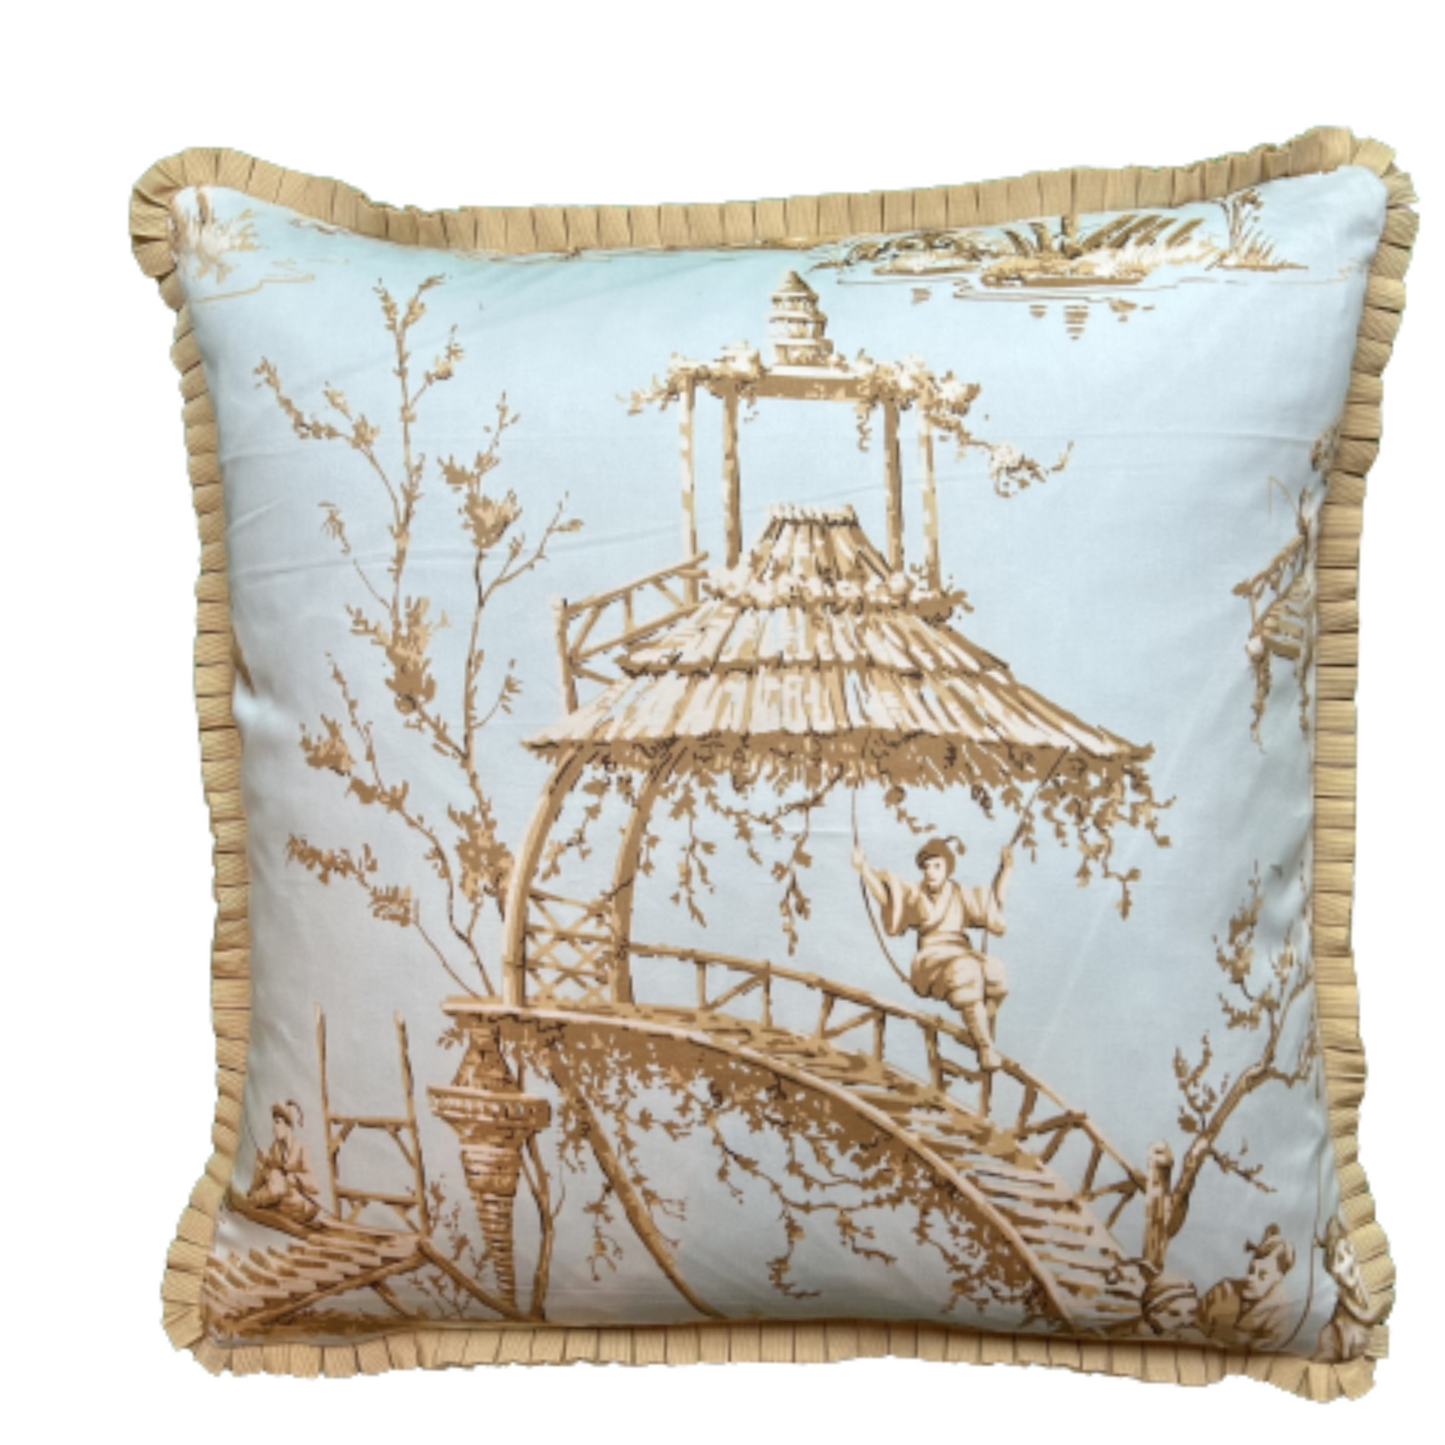 Pale Aqua Chinoiserie Garden Scene 20 x 20 Decorative Pillow with Down Feather Insert